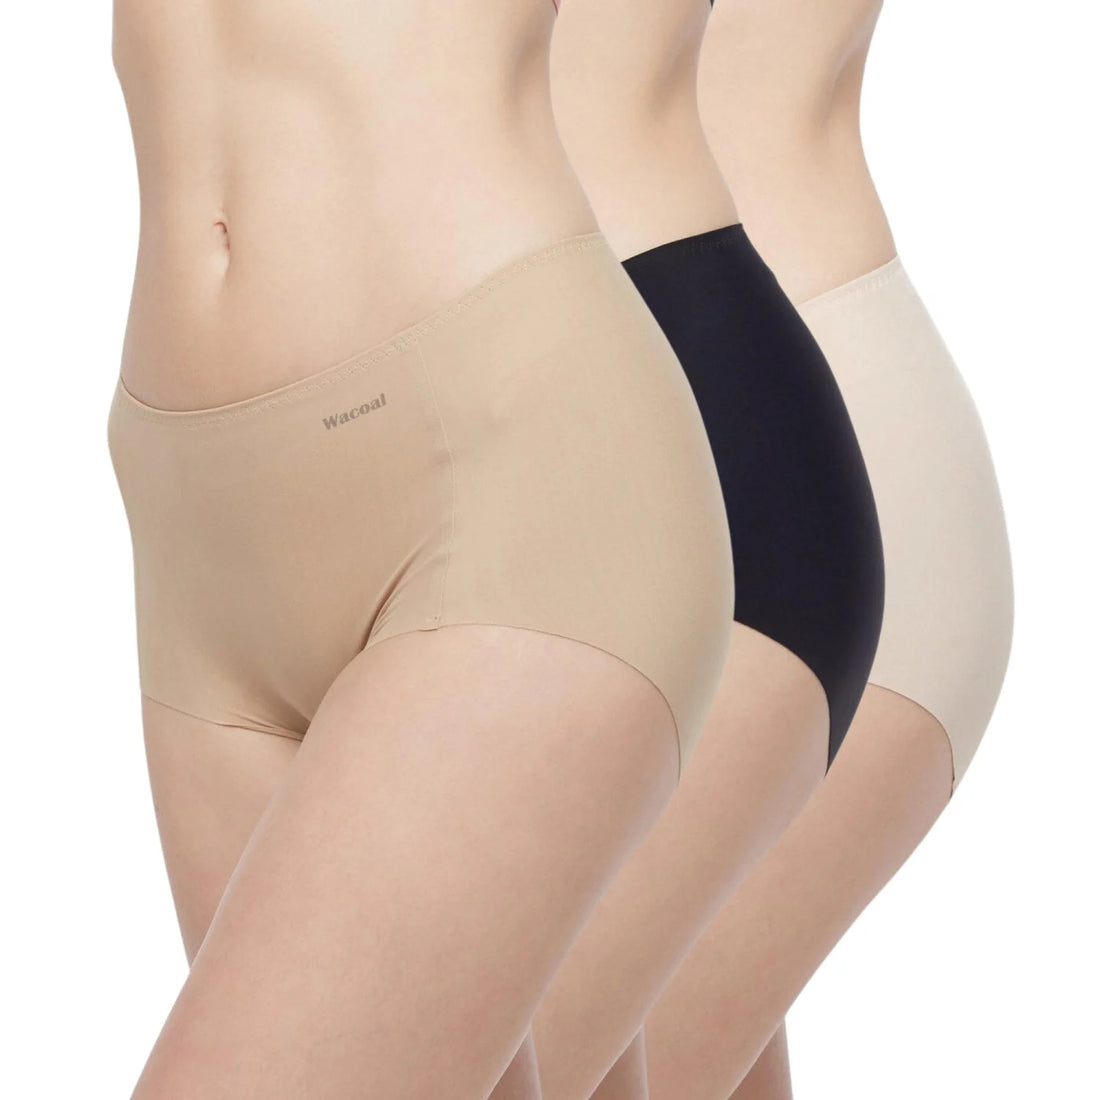 Wacoal Oh my nudes panty Seamless underwear, smooth, full body, set of 3 pieces, model WU4T99, assorted colors (beige-black-ovaltine).